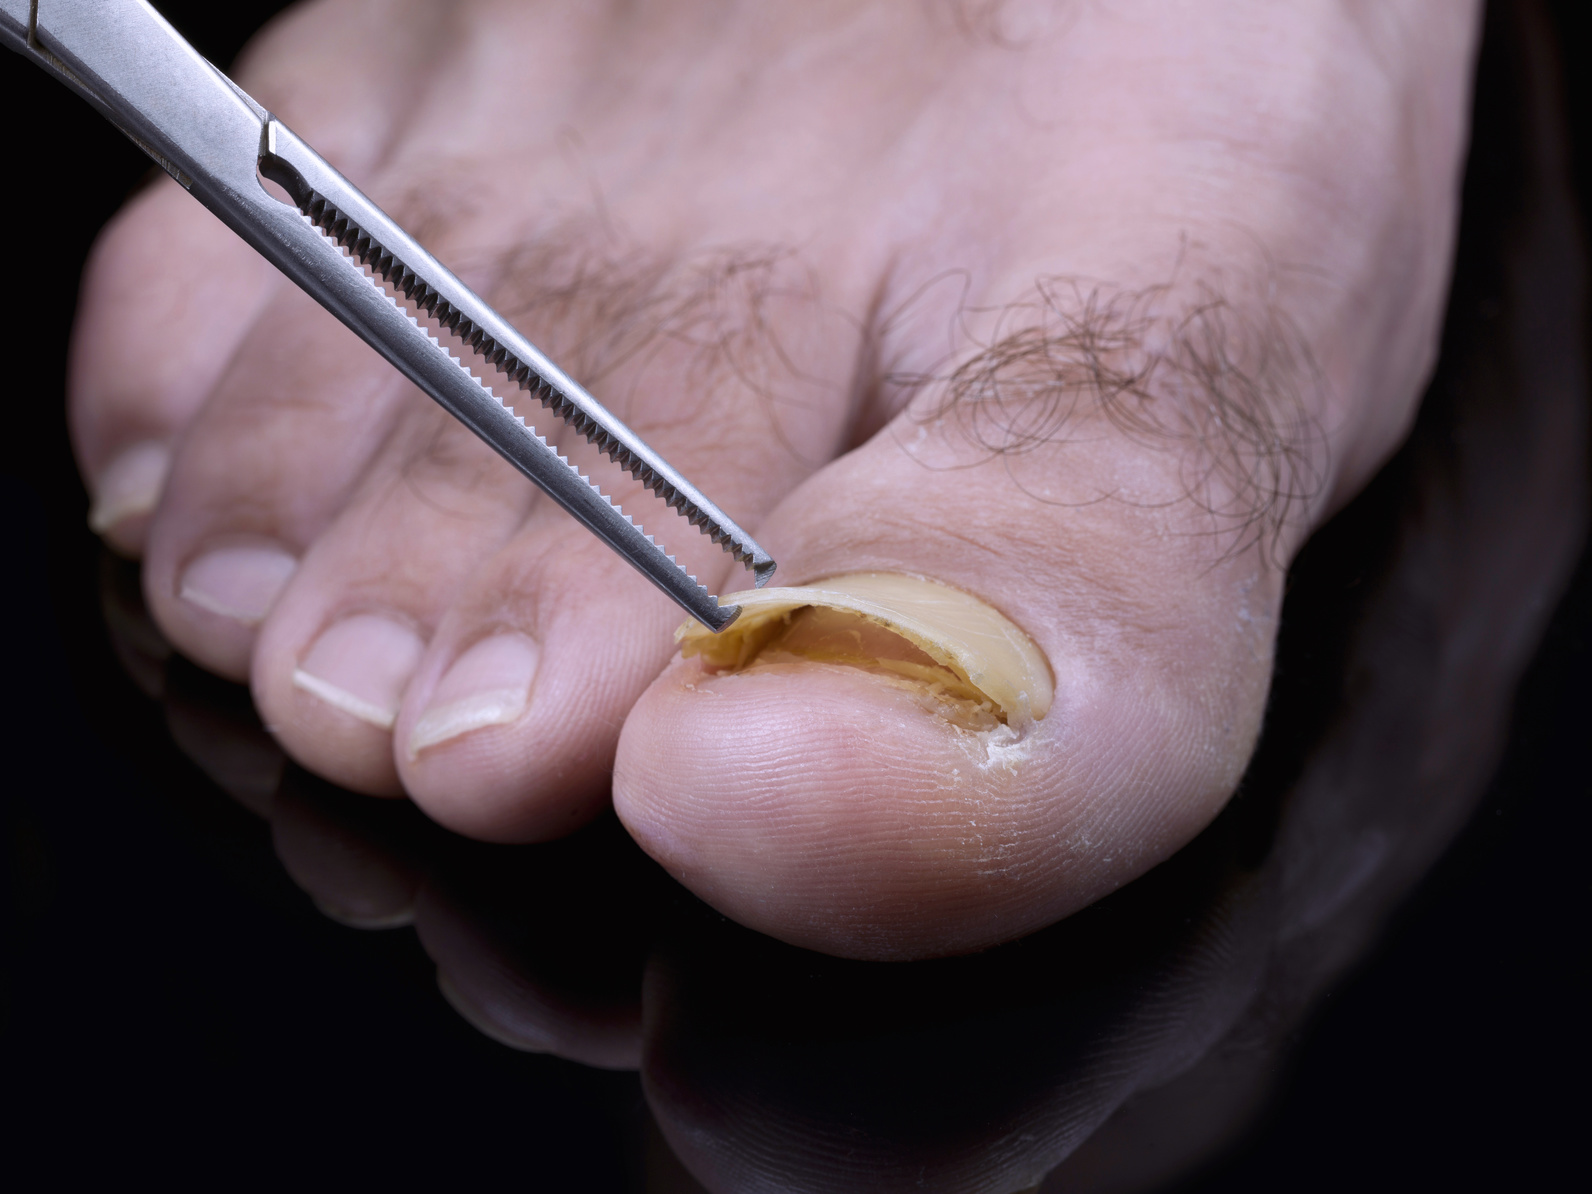 Causes of Big Toe Nail Changing Color and Falling Off - wide 2